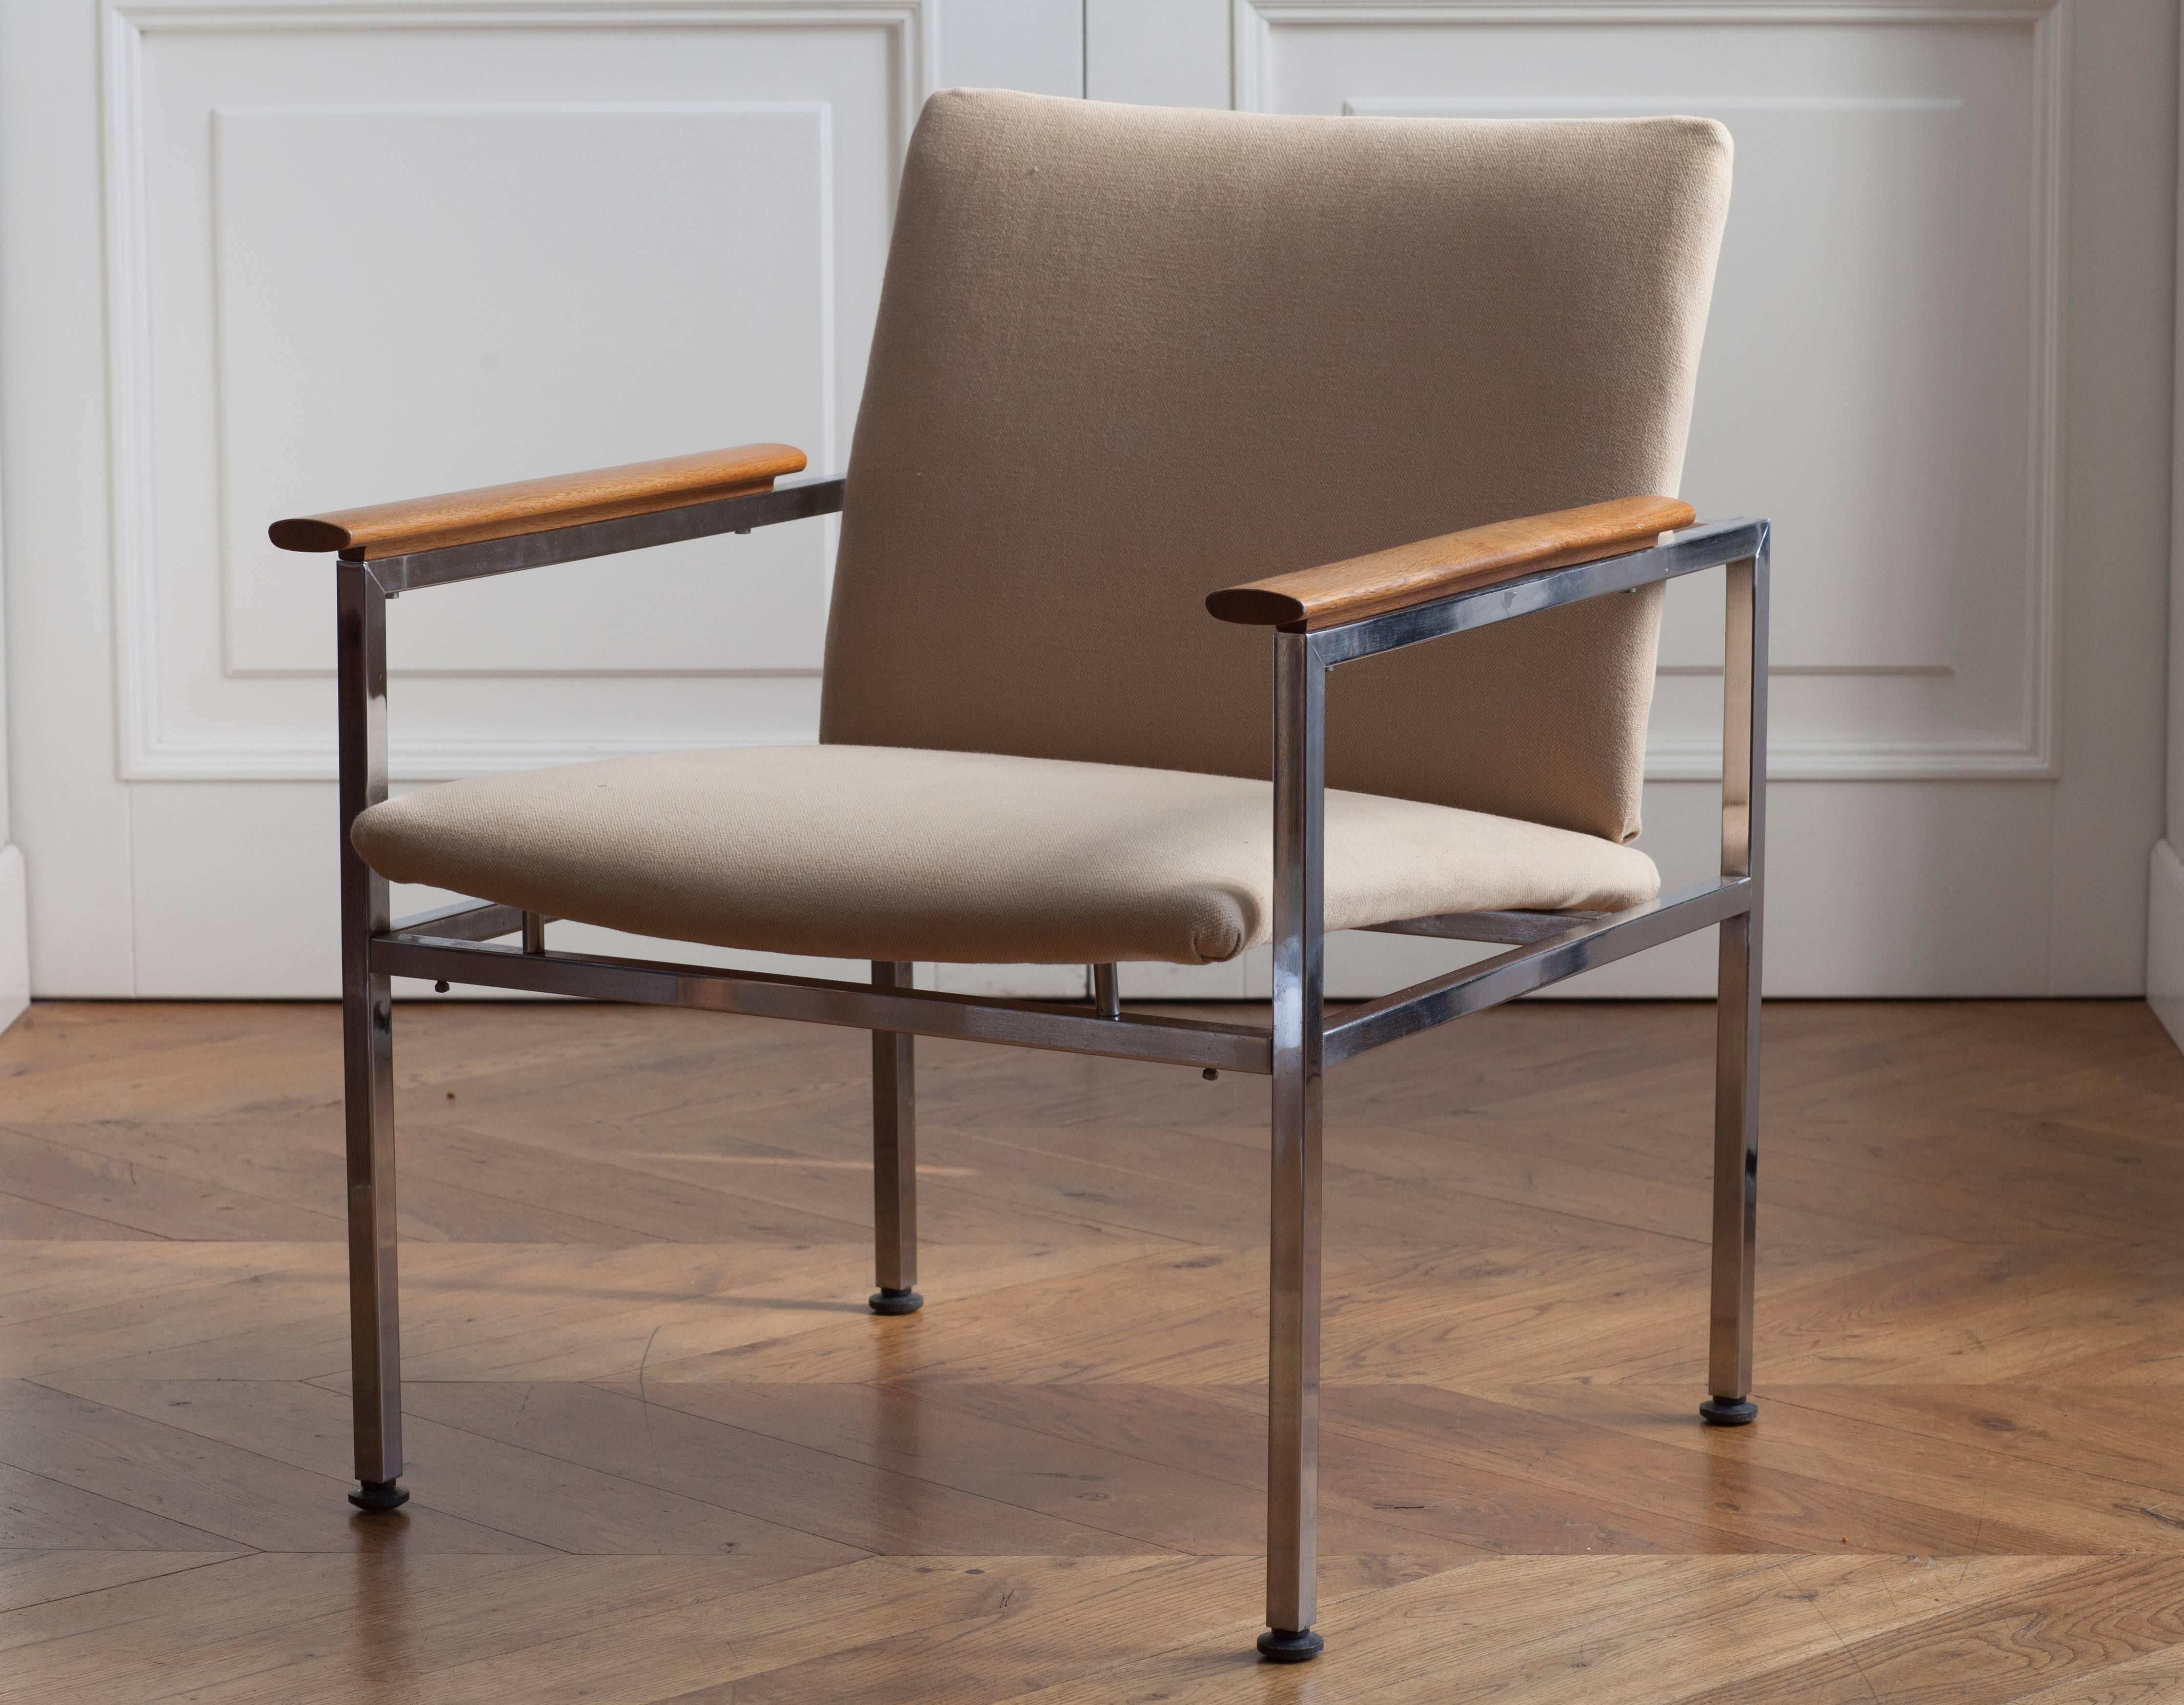 Two Swedish armchairs designed by Sigvard Bernadotte. The seats were designed for Stockholm airports in the 1960s. The seats are changed upholstery. The new fabric is cream-colored. The fabric is highly abrasive, upholstery. The fabric is Elitis